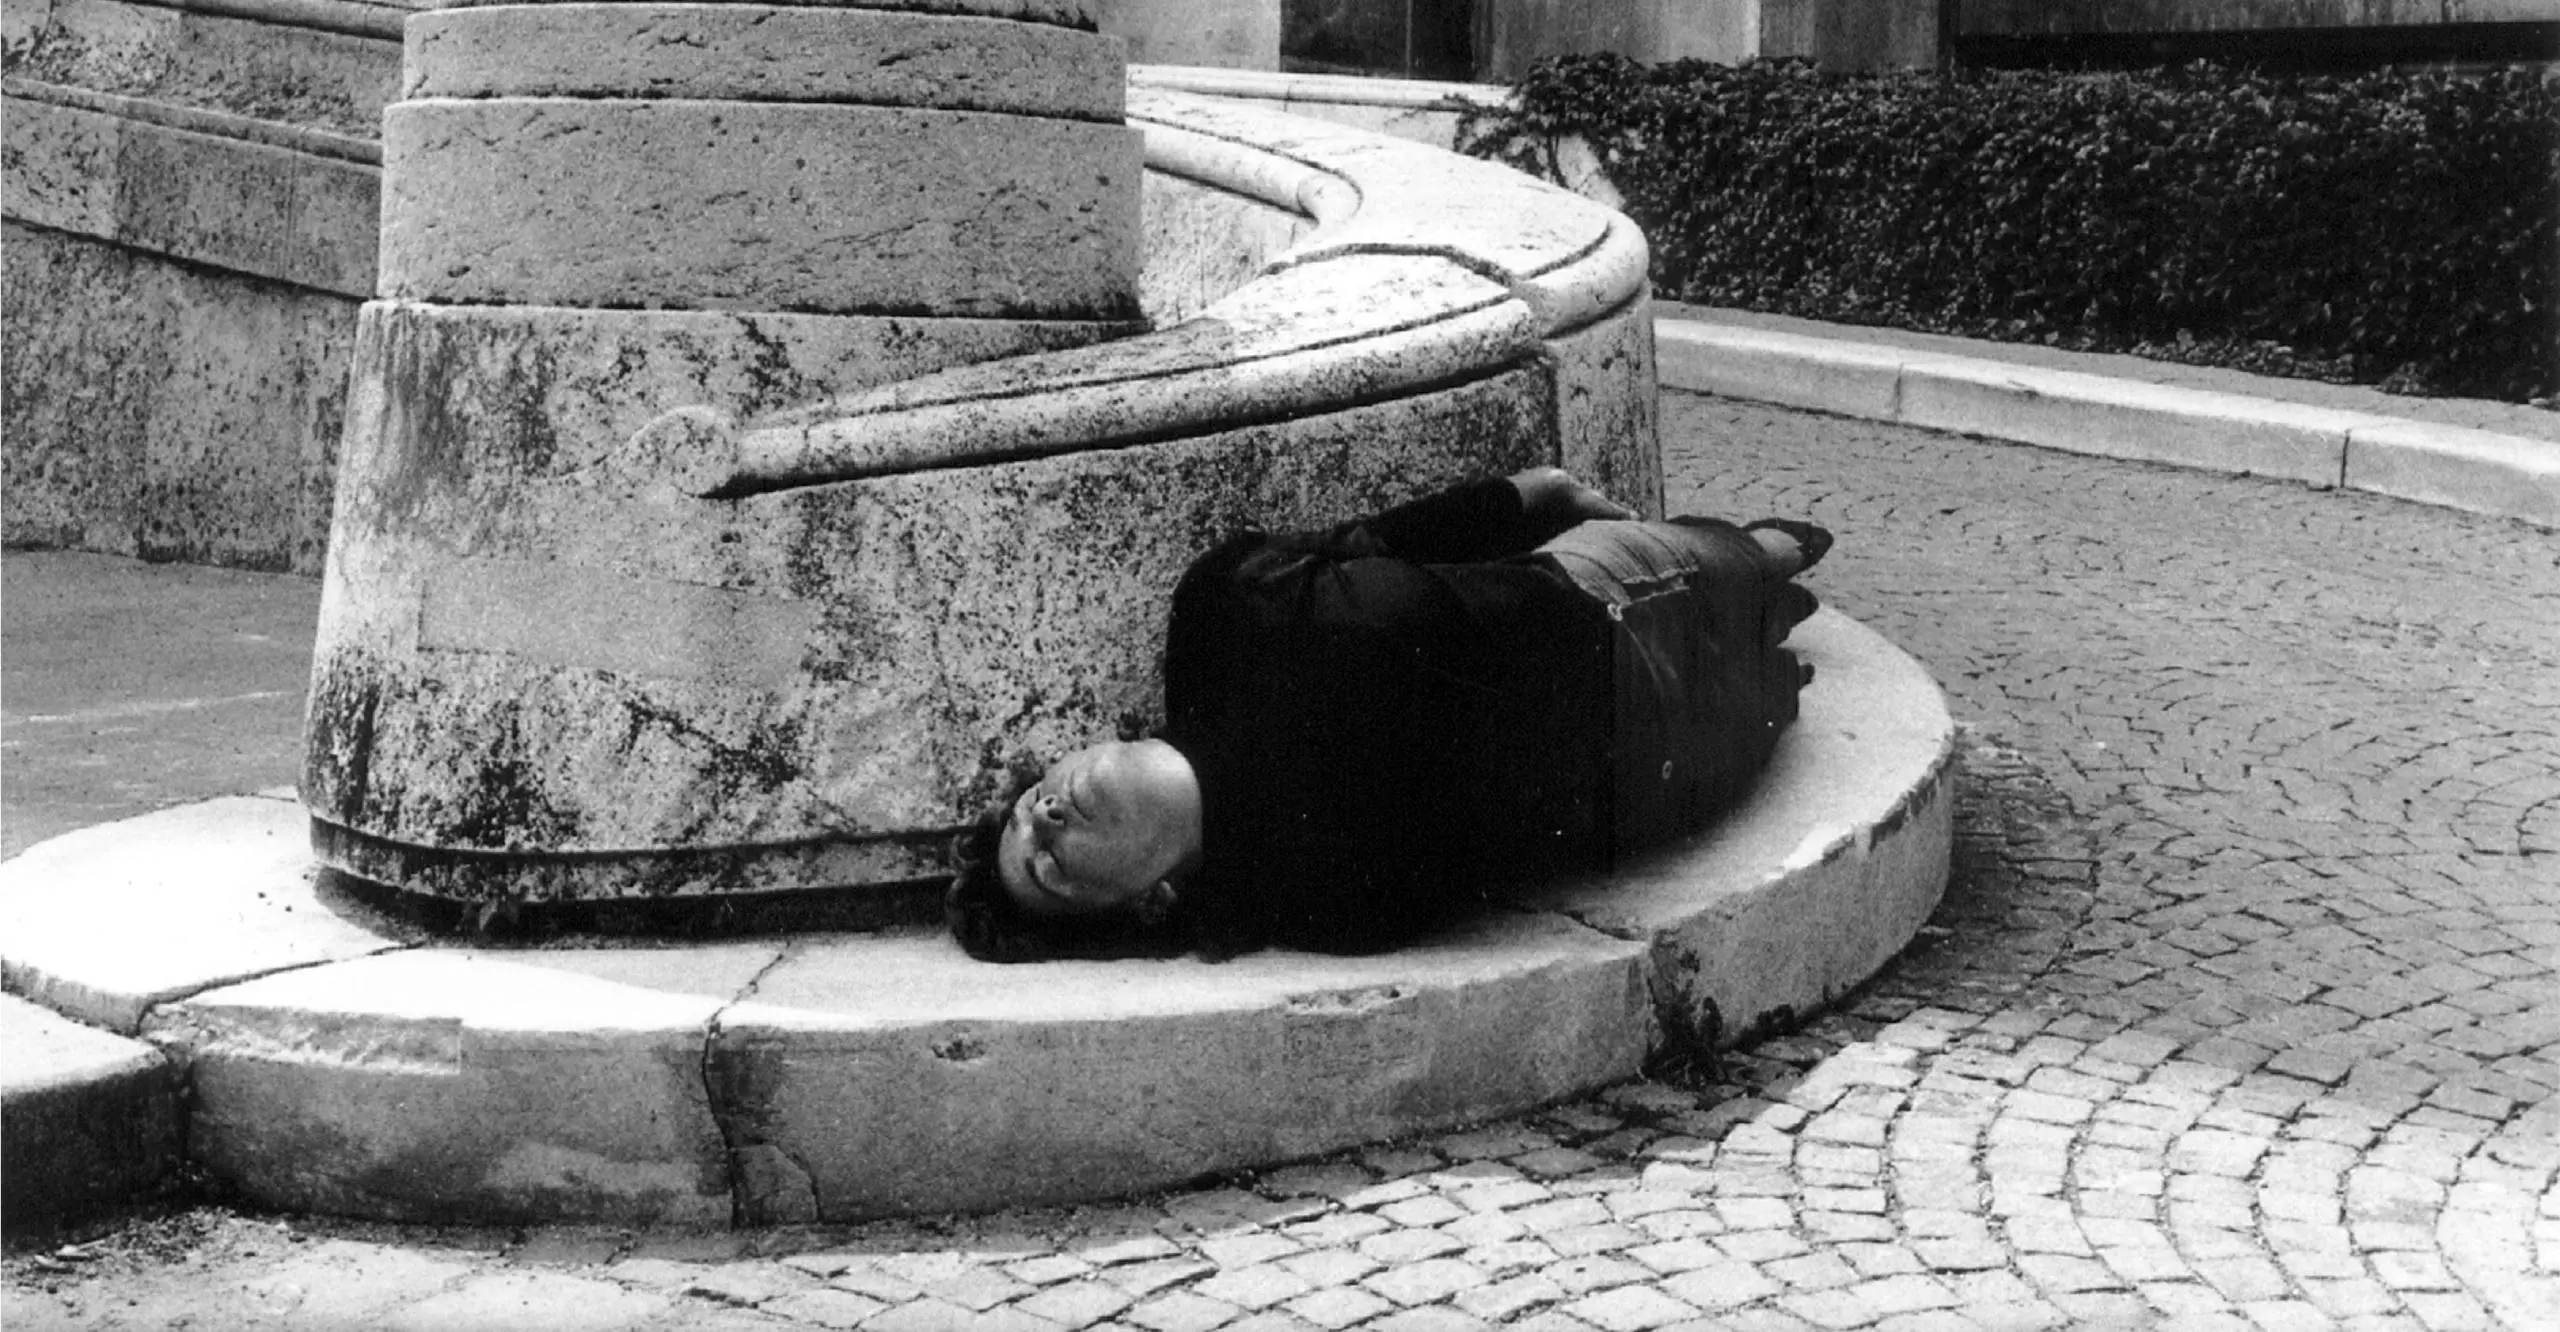 Black and white photo of a person lying around a pavement